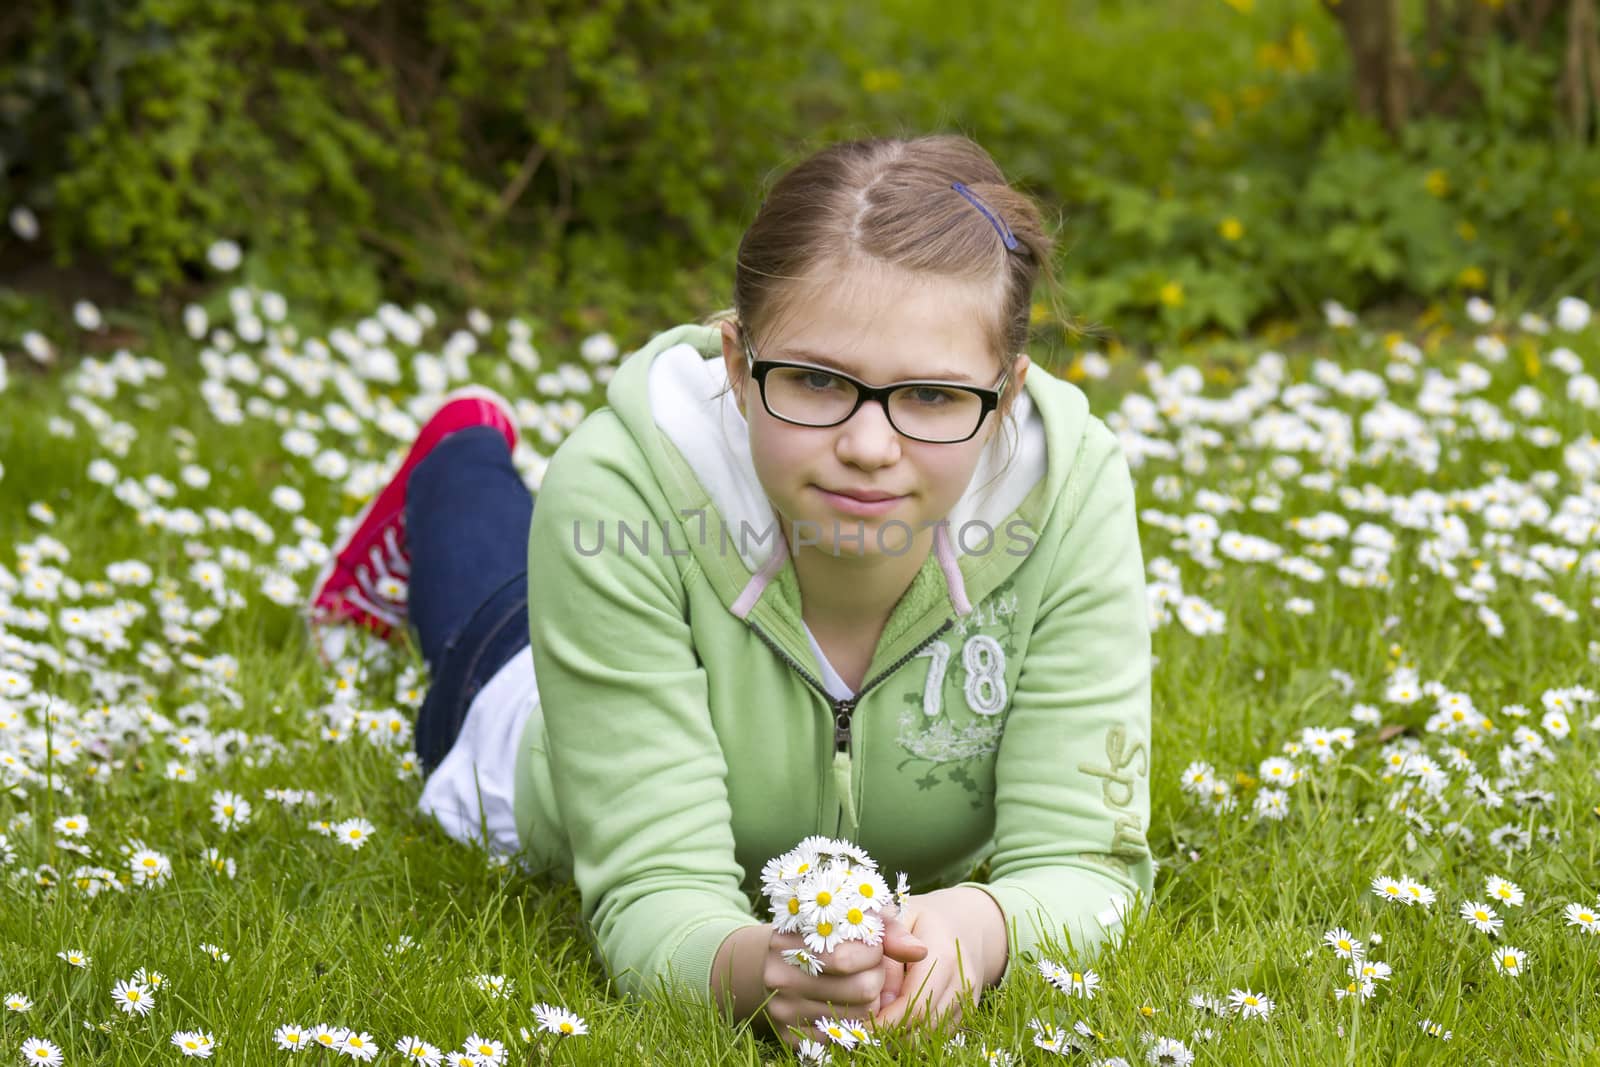 young girl picking daisies